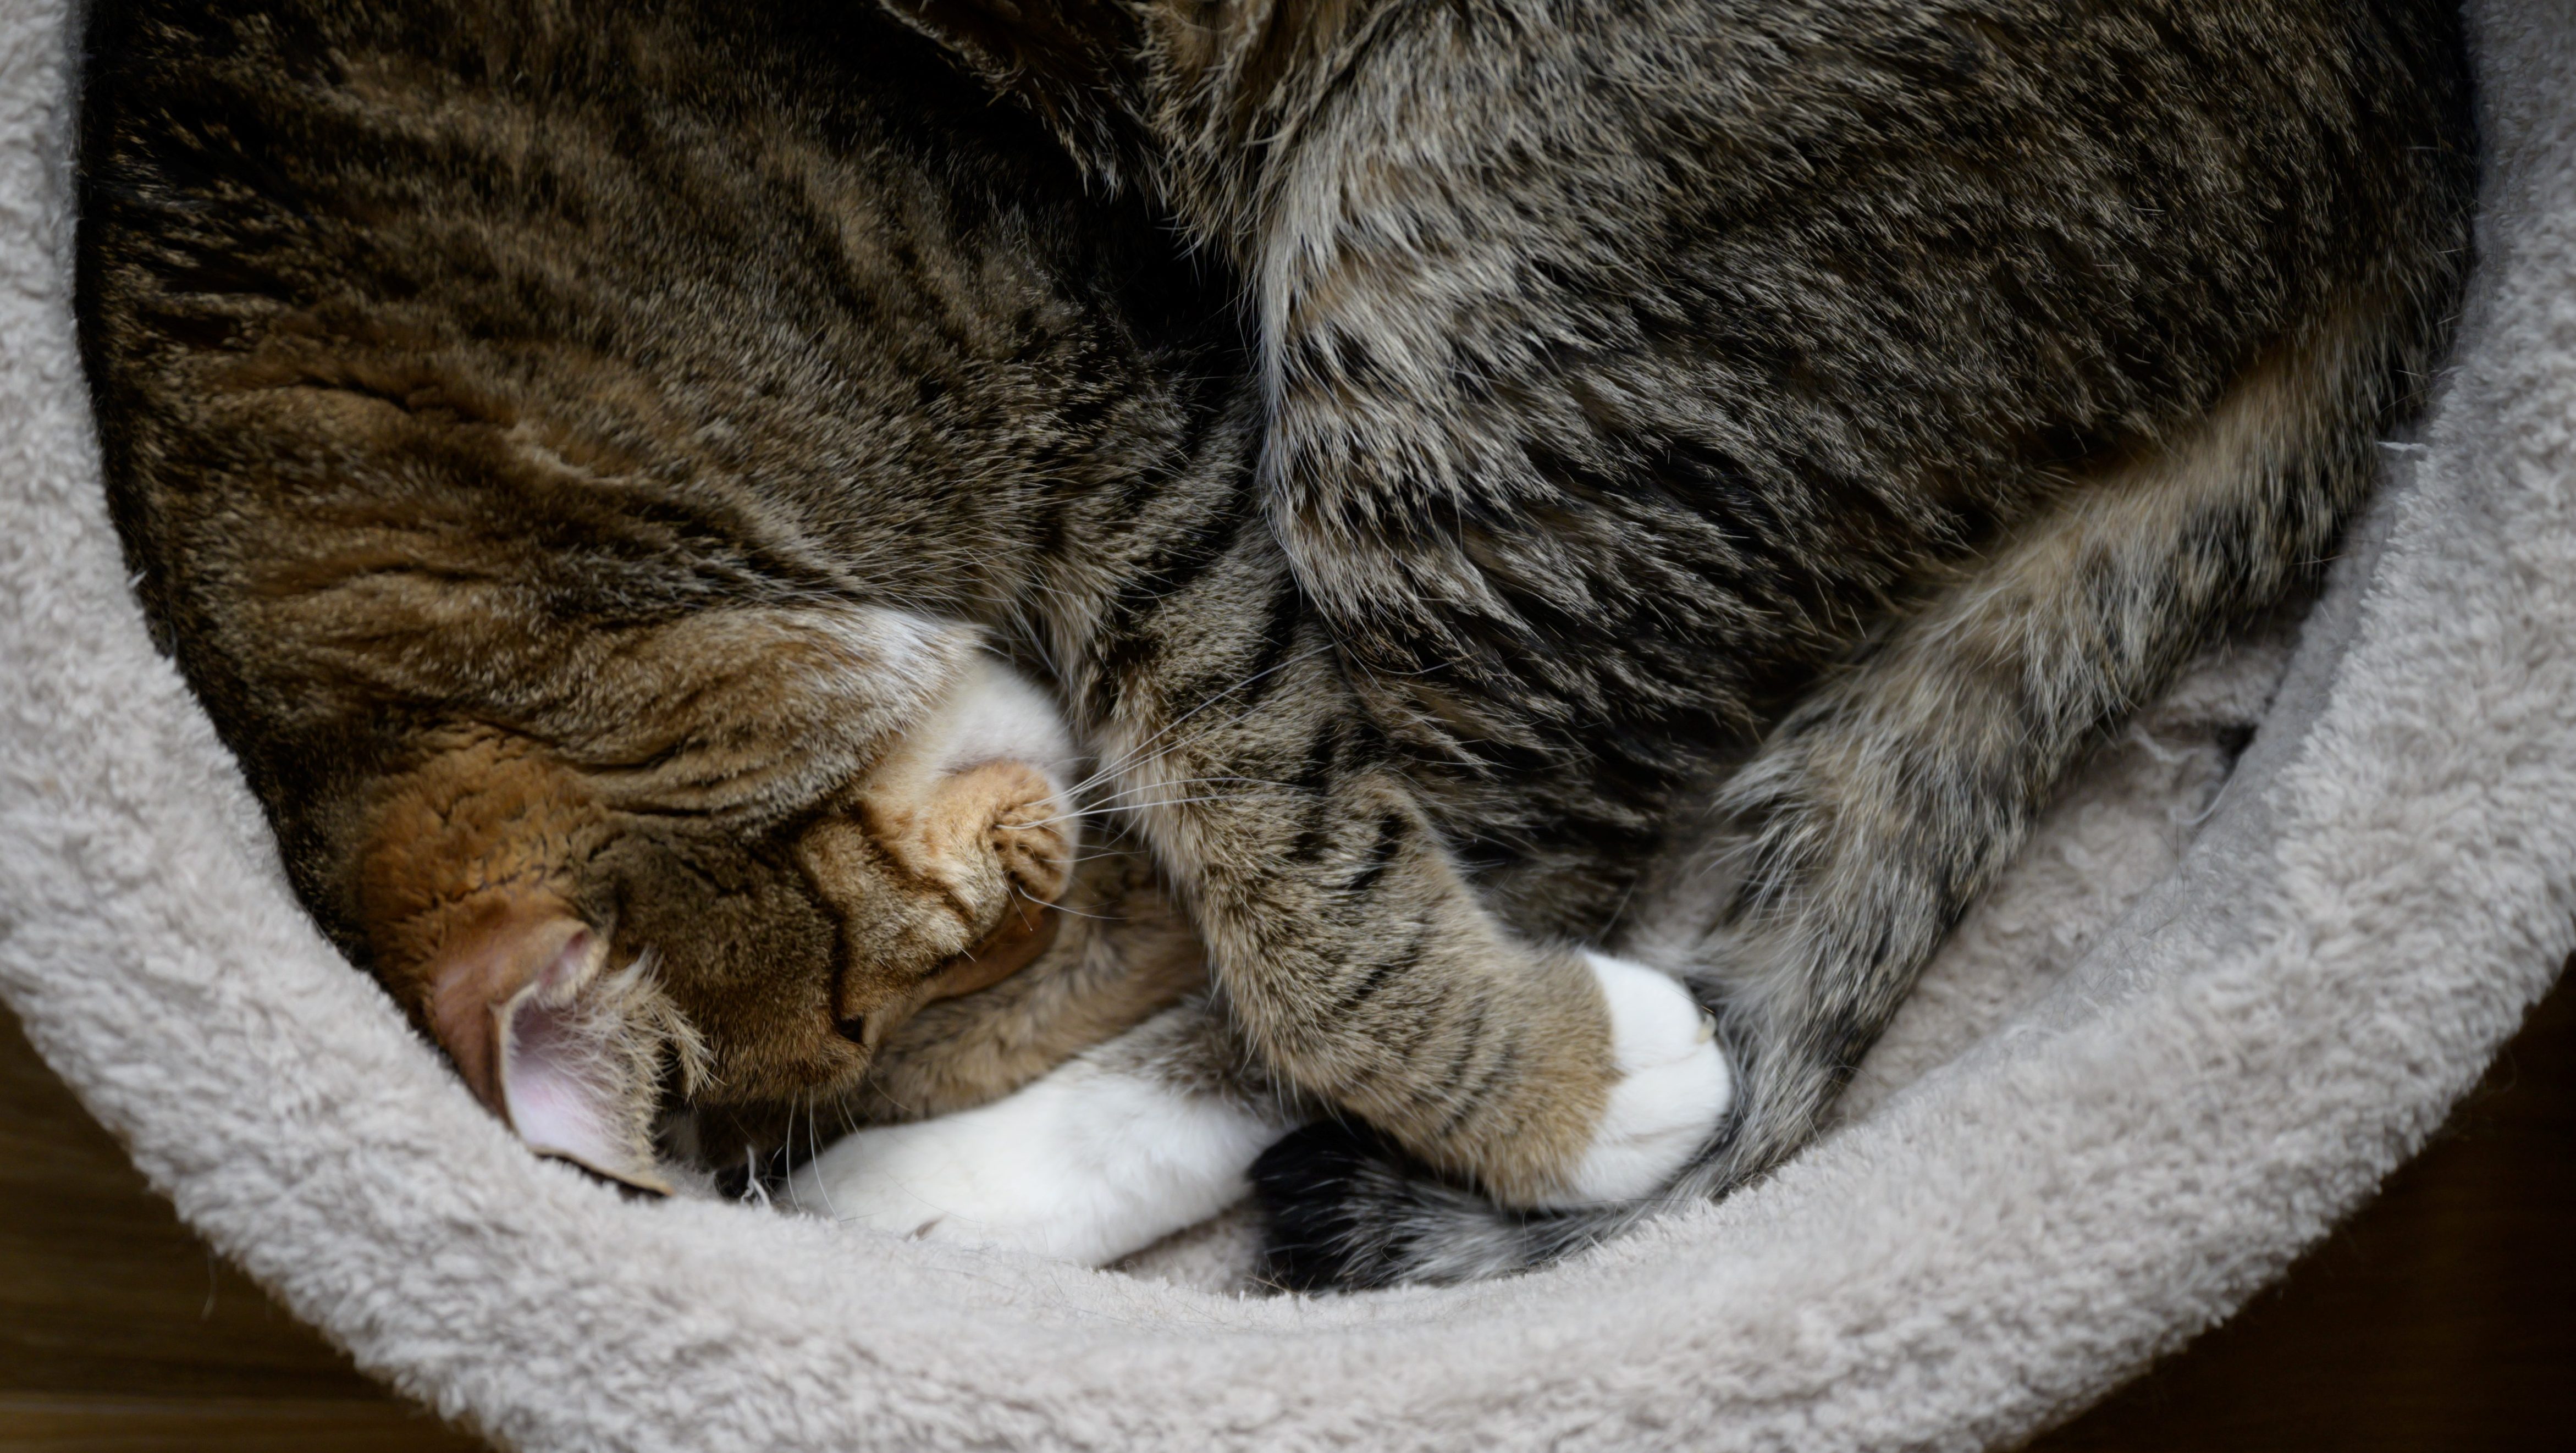 Can Cats Get Coronavirus or Spread It to People?